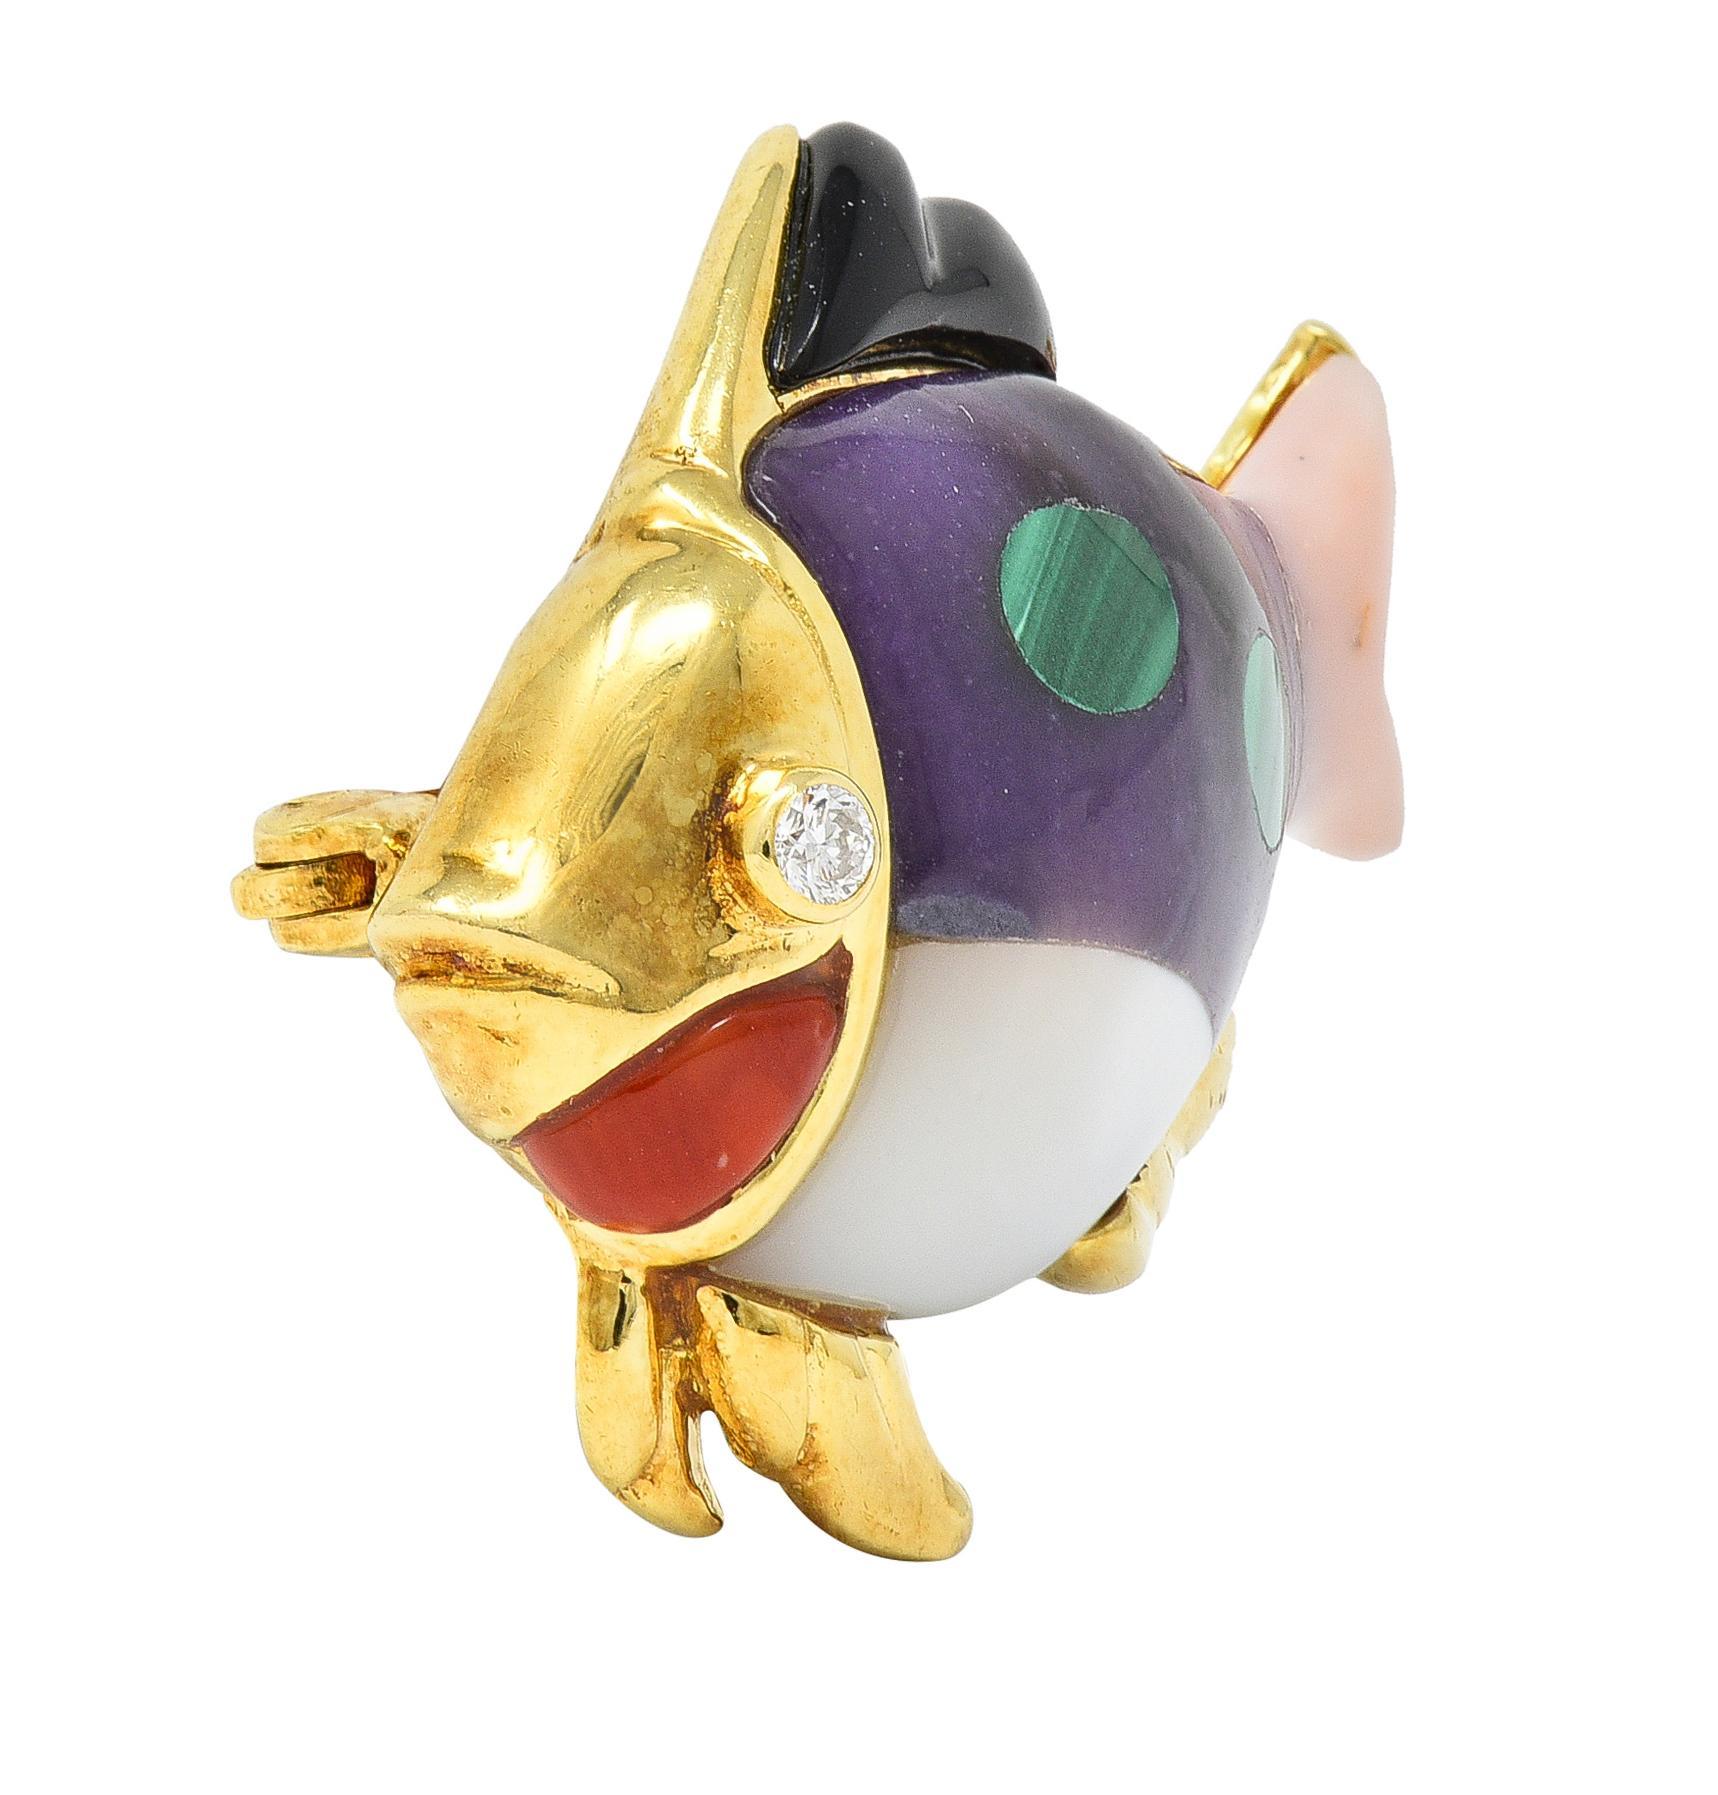 Designed as a stylized fish comprised of inlaid gemstone body and fins 
With amethyst, carnelian, malachite, mother-of-pearl, onyx, and rose quartz
Accented by a round brilliant cut diamond eye
Eye clean and bright - bezel set 
With grooved gold